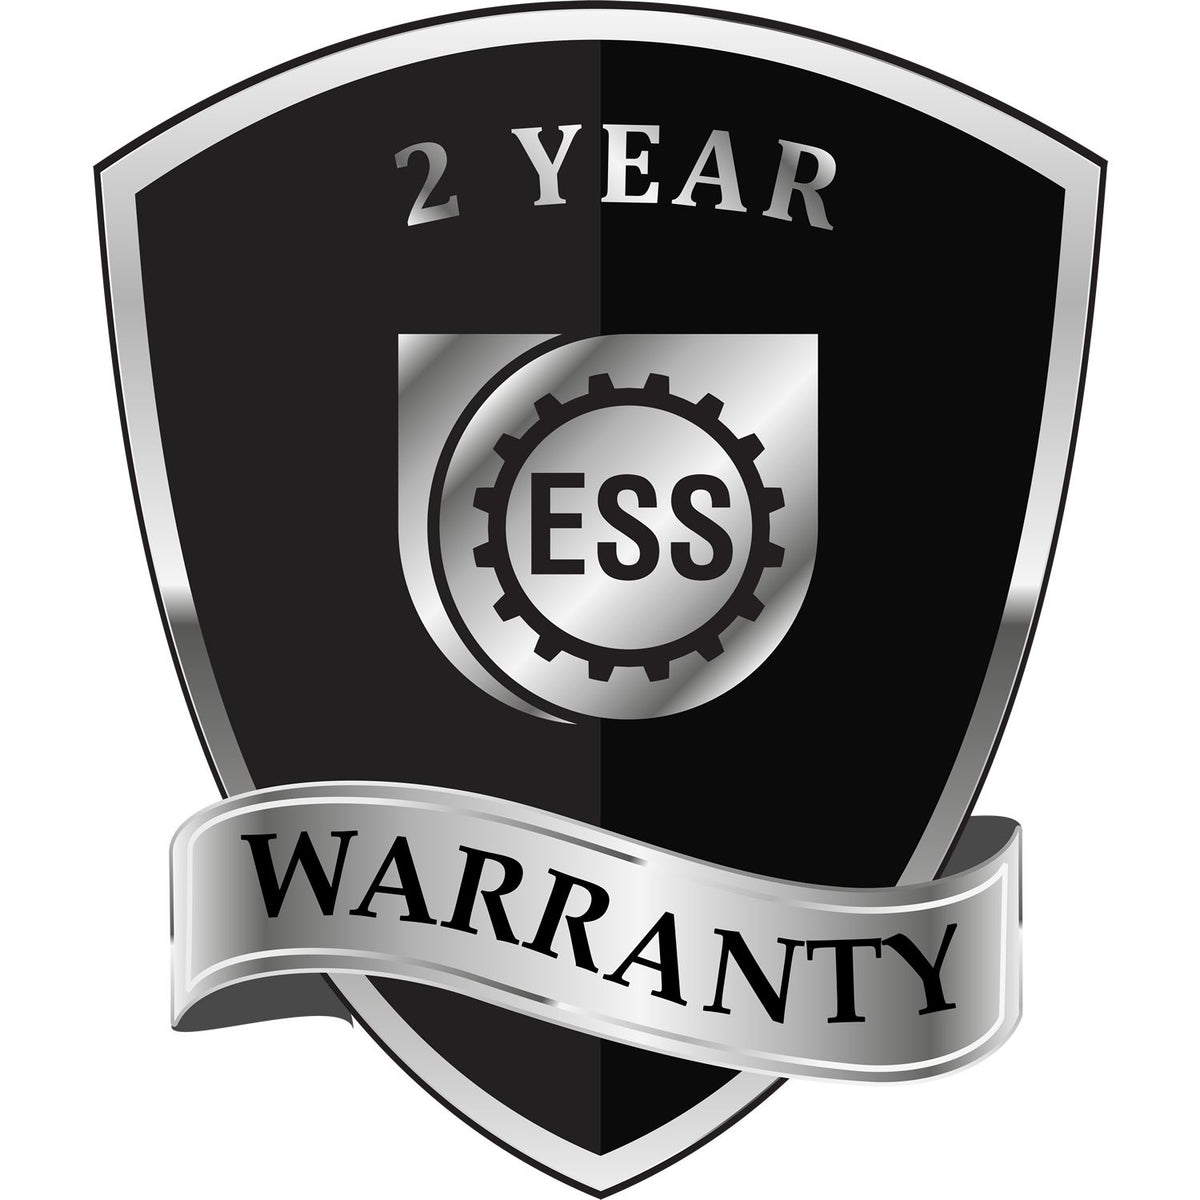 A badge or emblem showing a warranty icon for the Heavy Duty Cast Iron West Virginia Engineer Seal Embosser